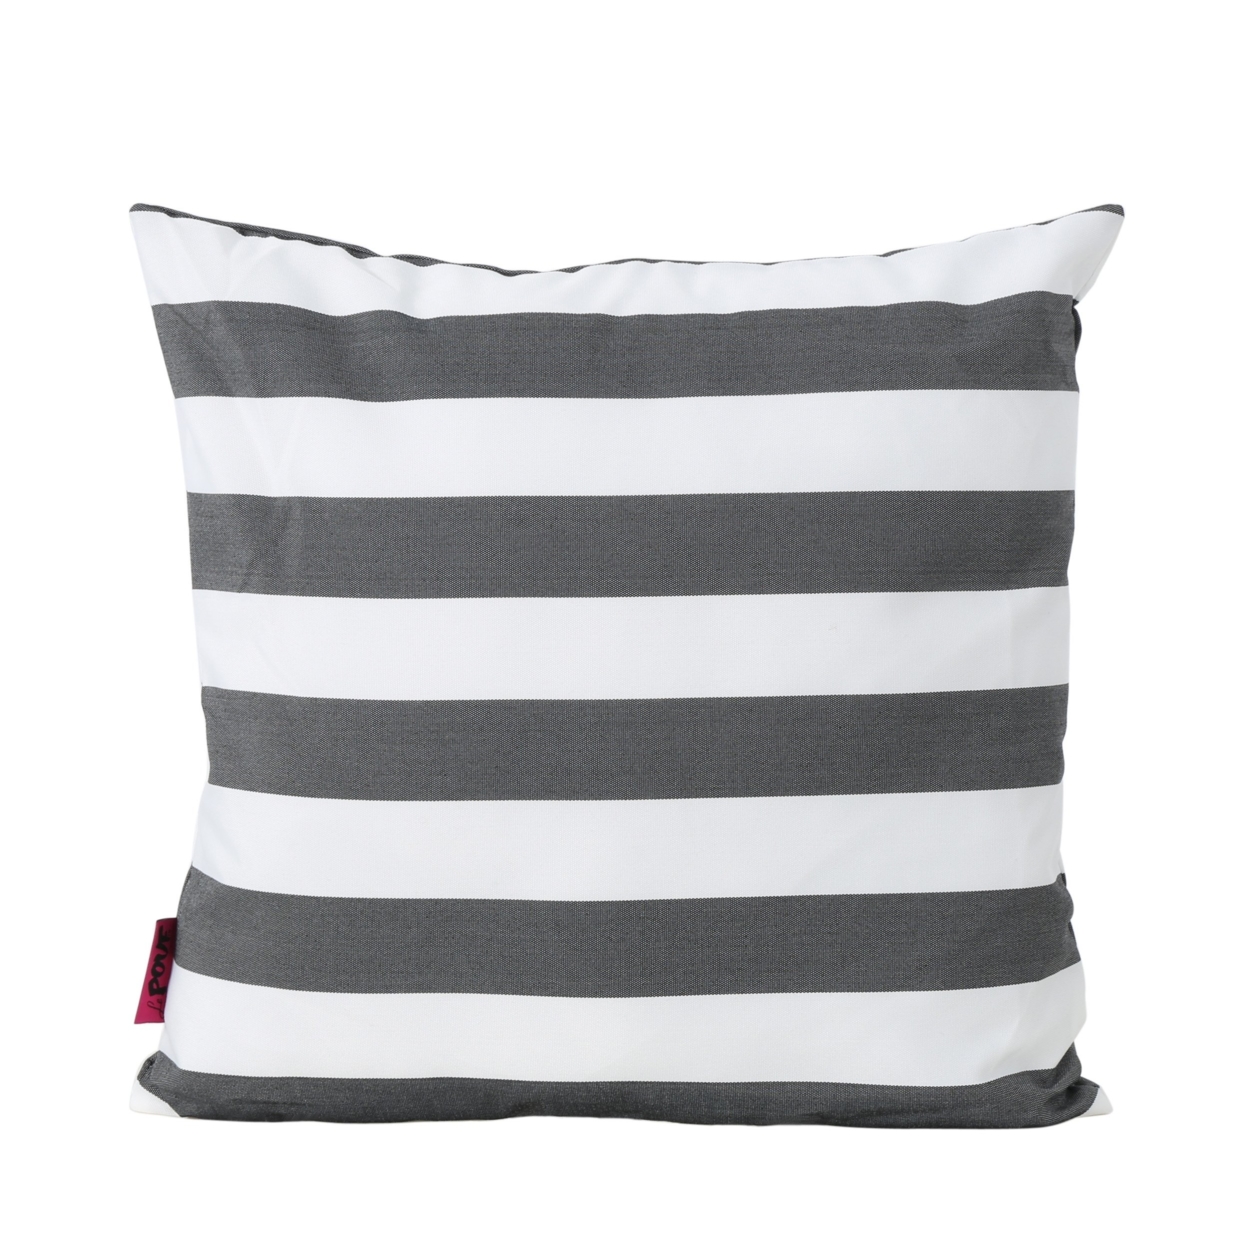 La Mesa Indoor Striped Water Resistant Square Throw Pillow - Green/white, Single